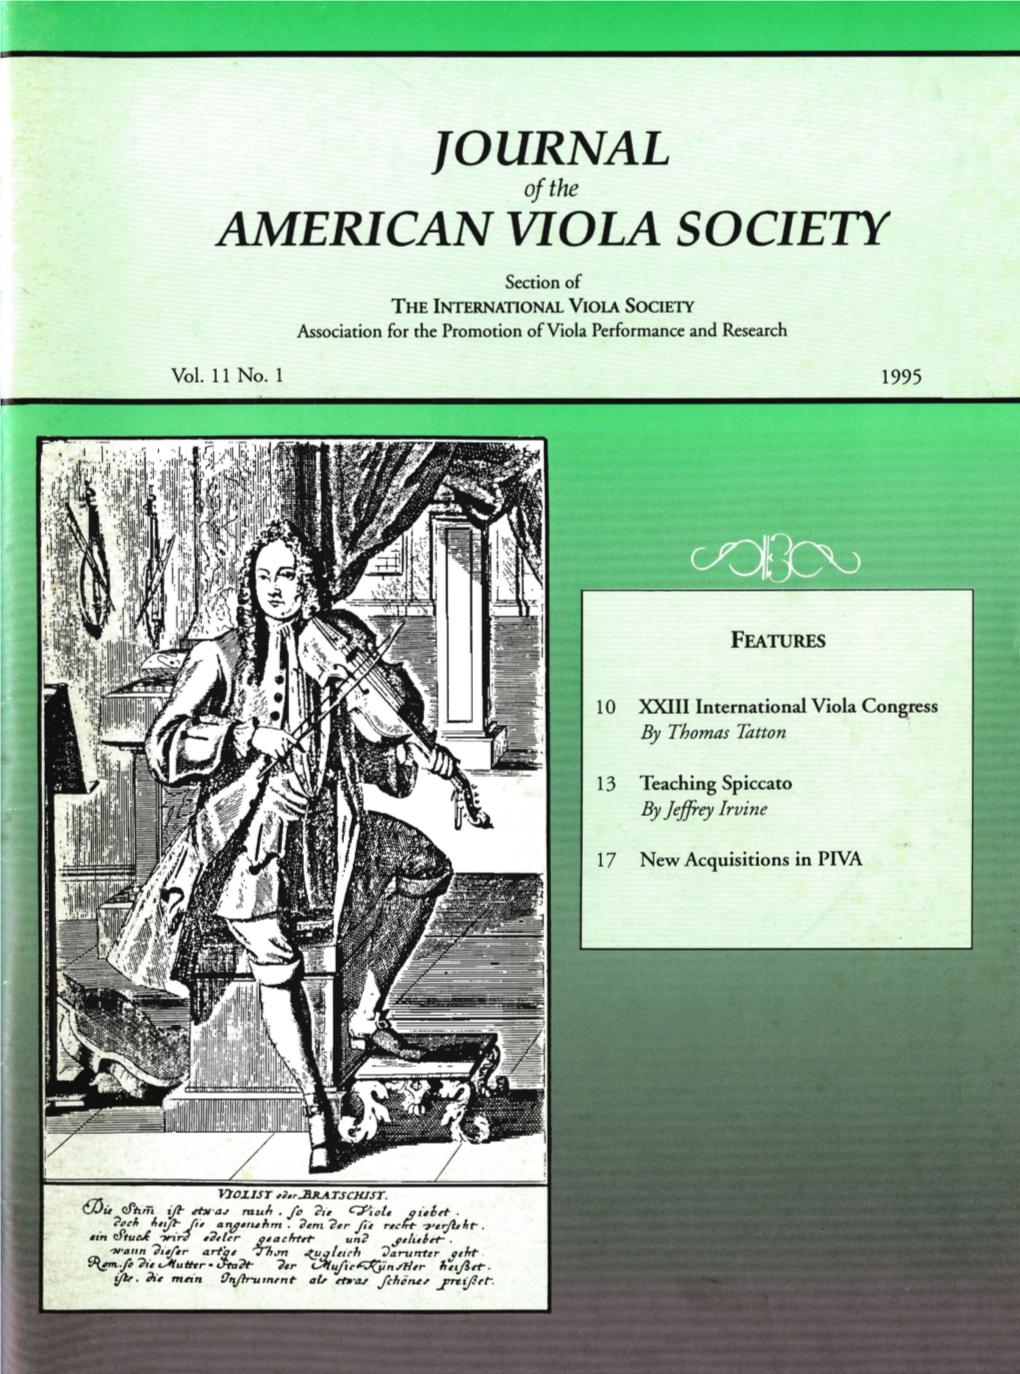 Journal of the American Viola Society Volume 11 No. 1, 1995